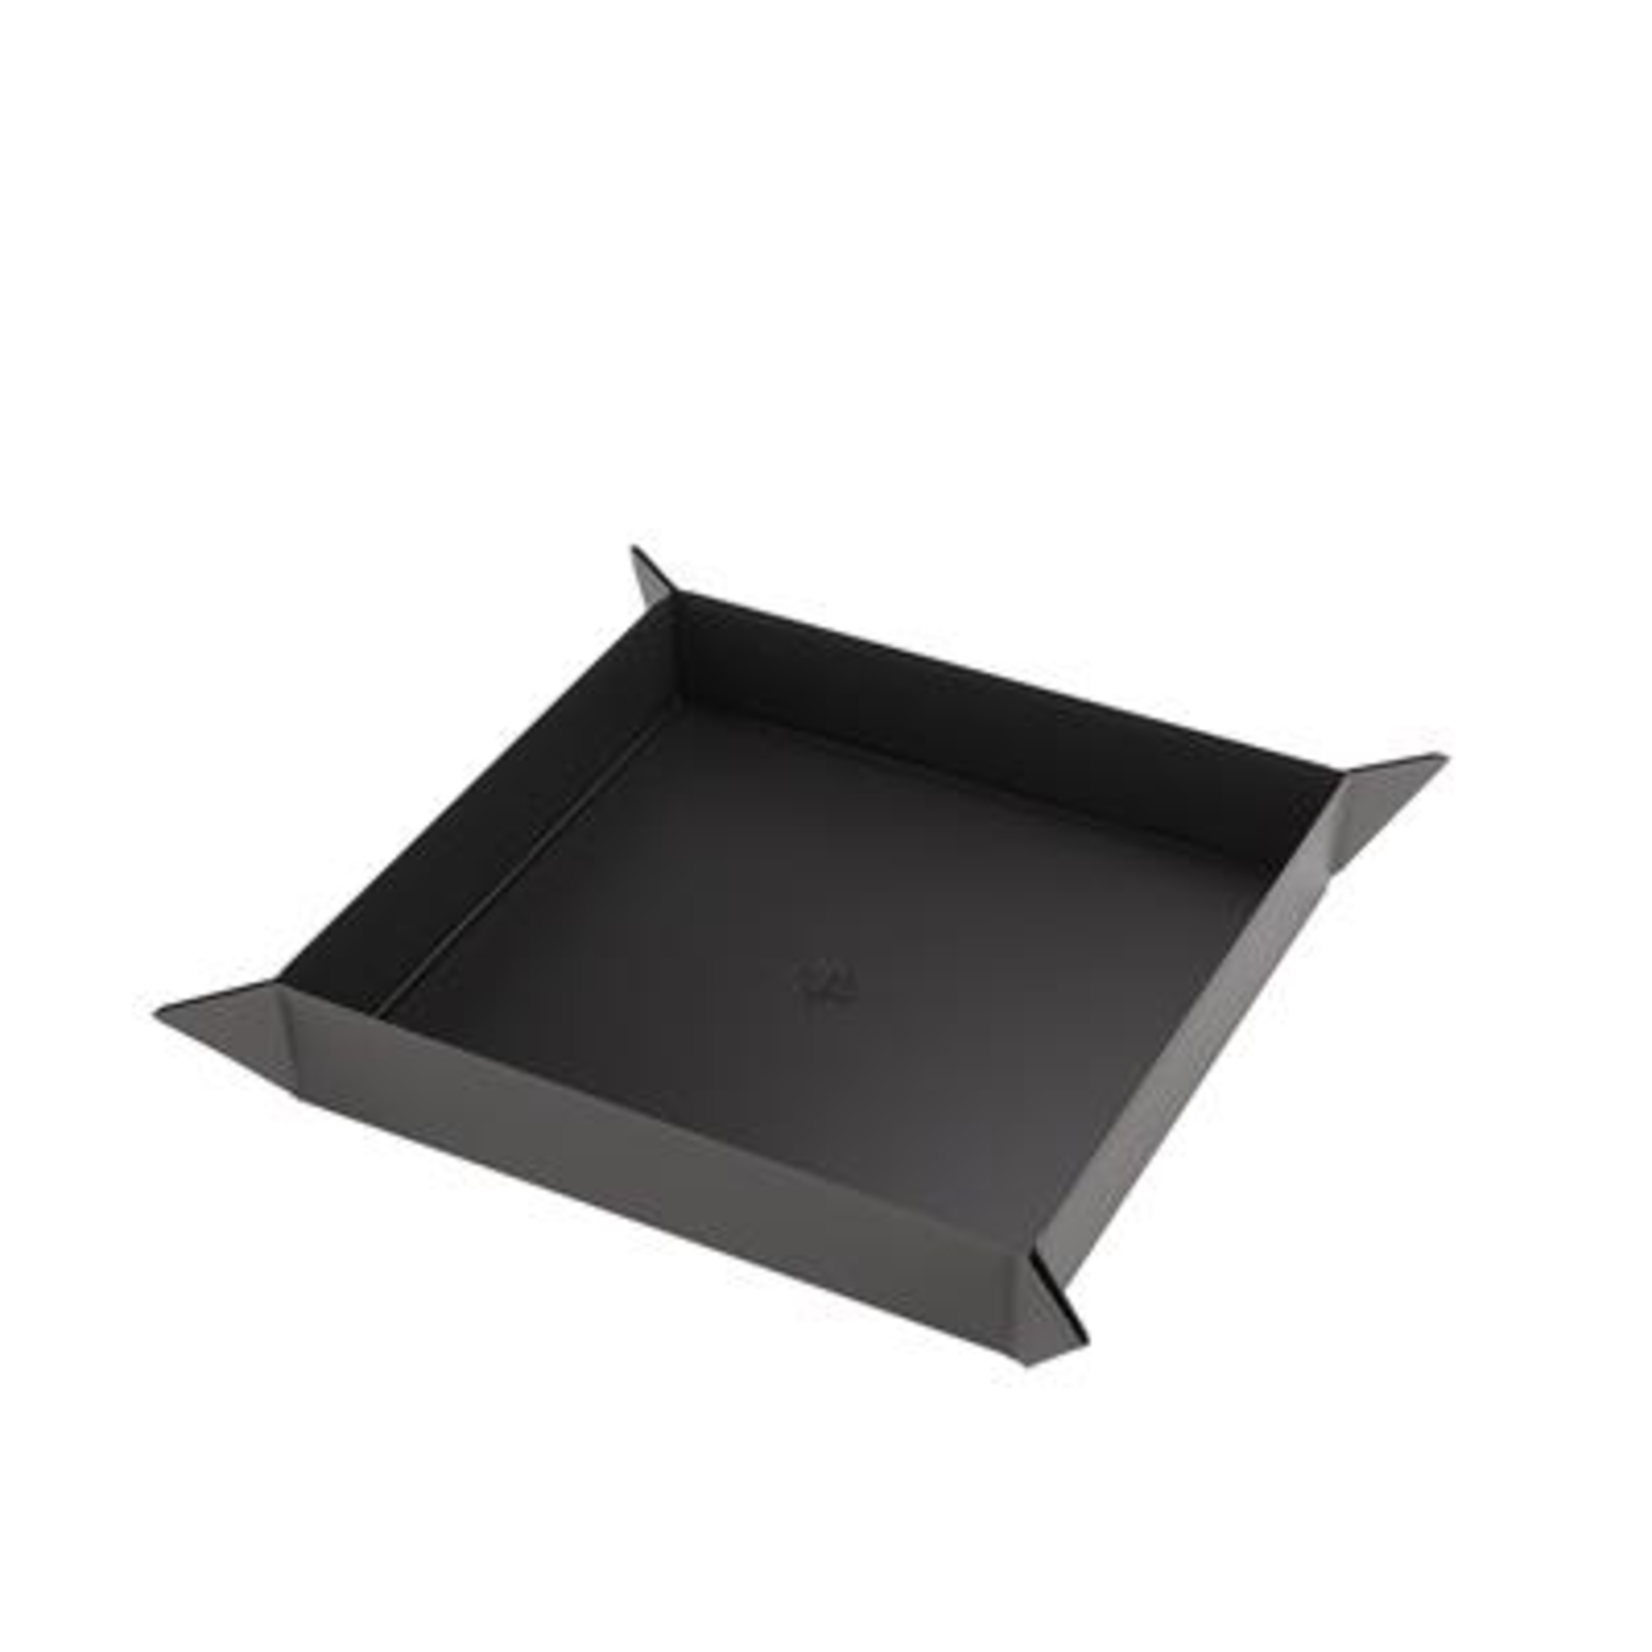 Gamegenic Gamegenic Magnetic Dice Tray Square Black and Gray